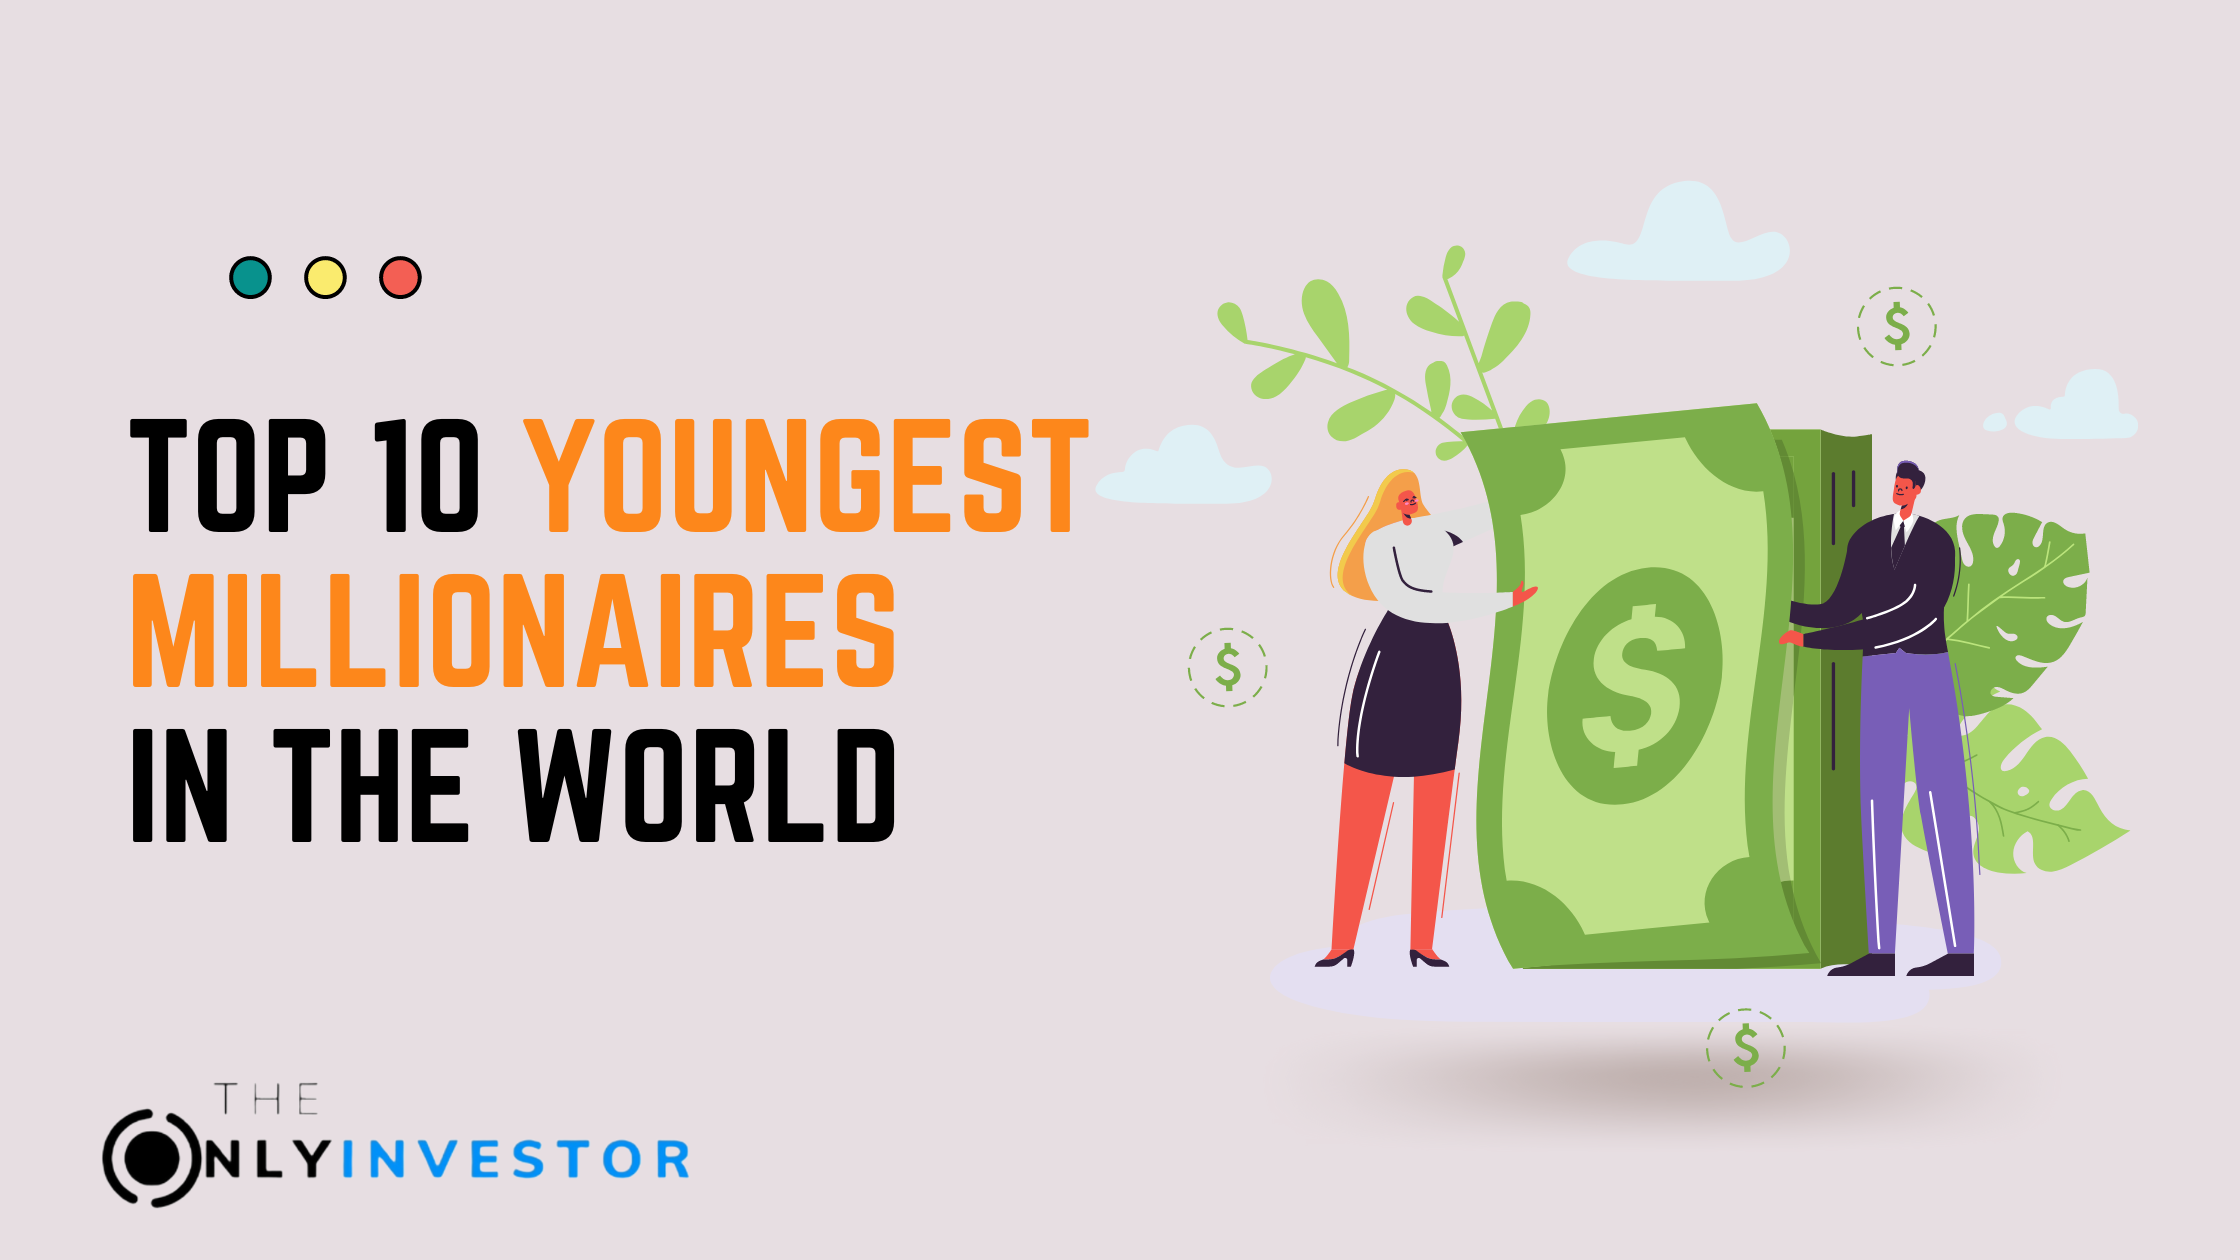 Top 10 Youngest Millionaires in the world